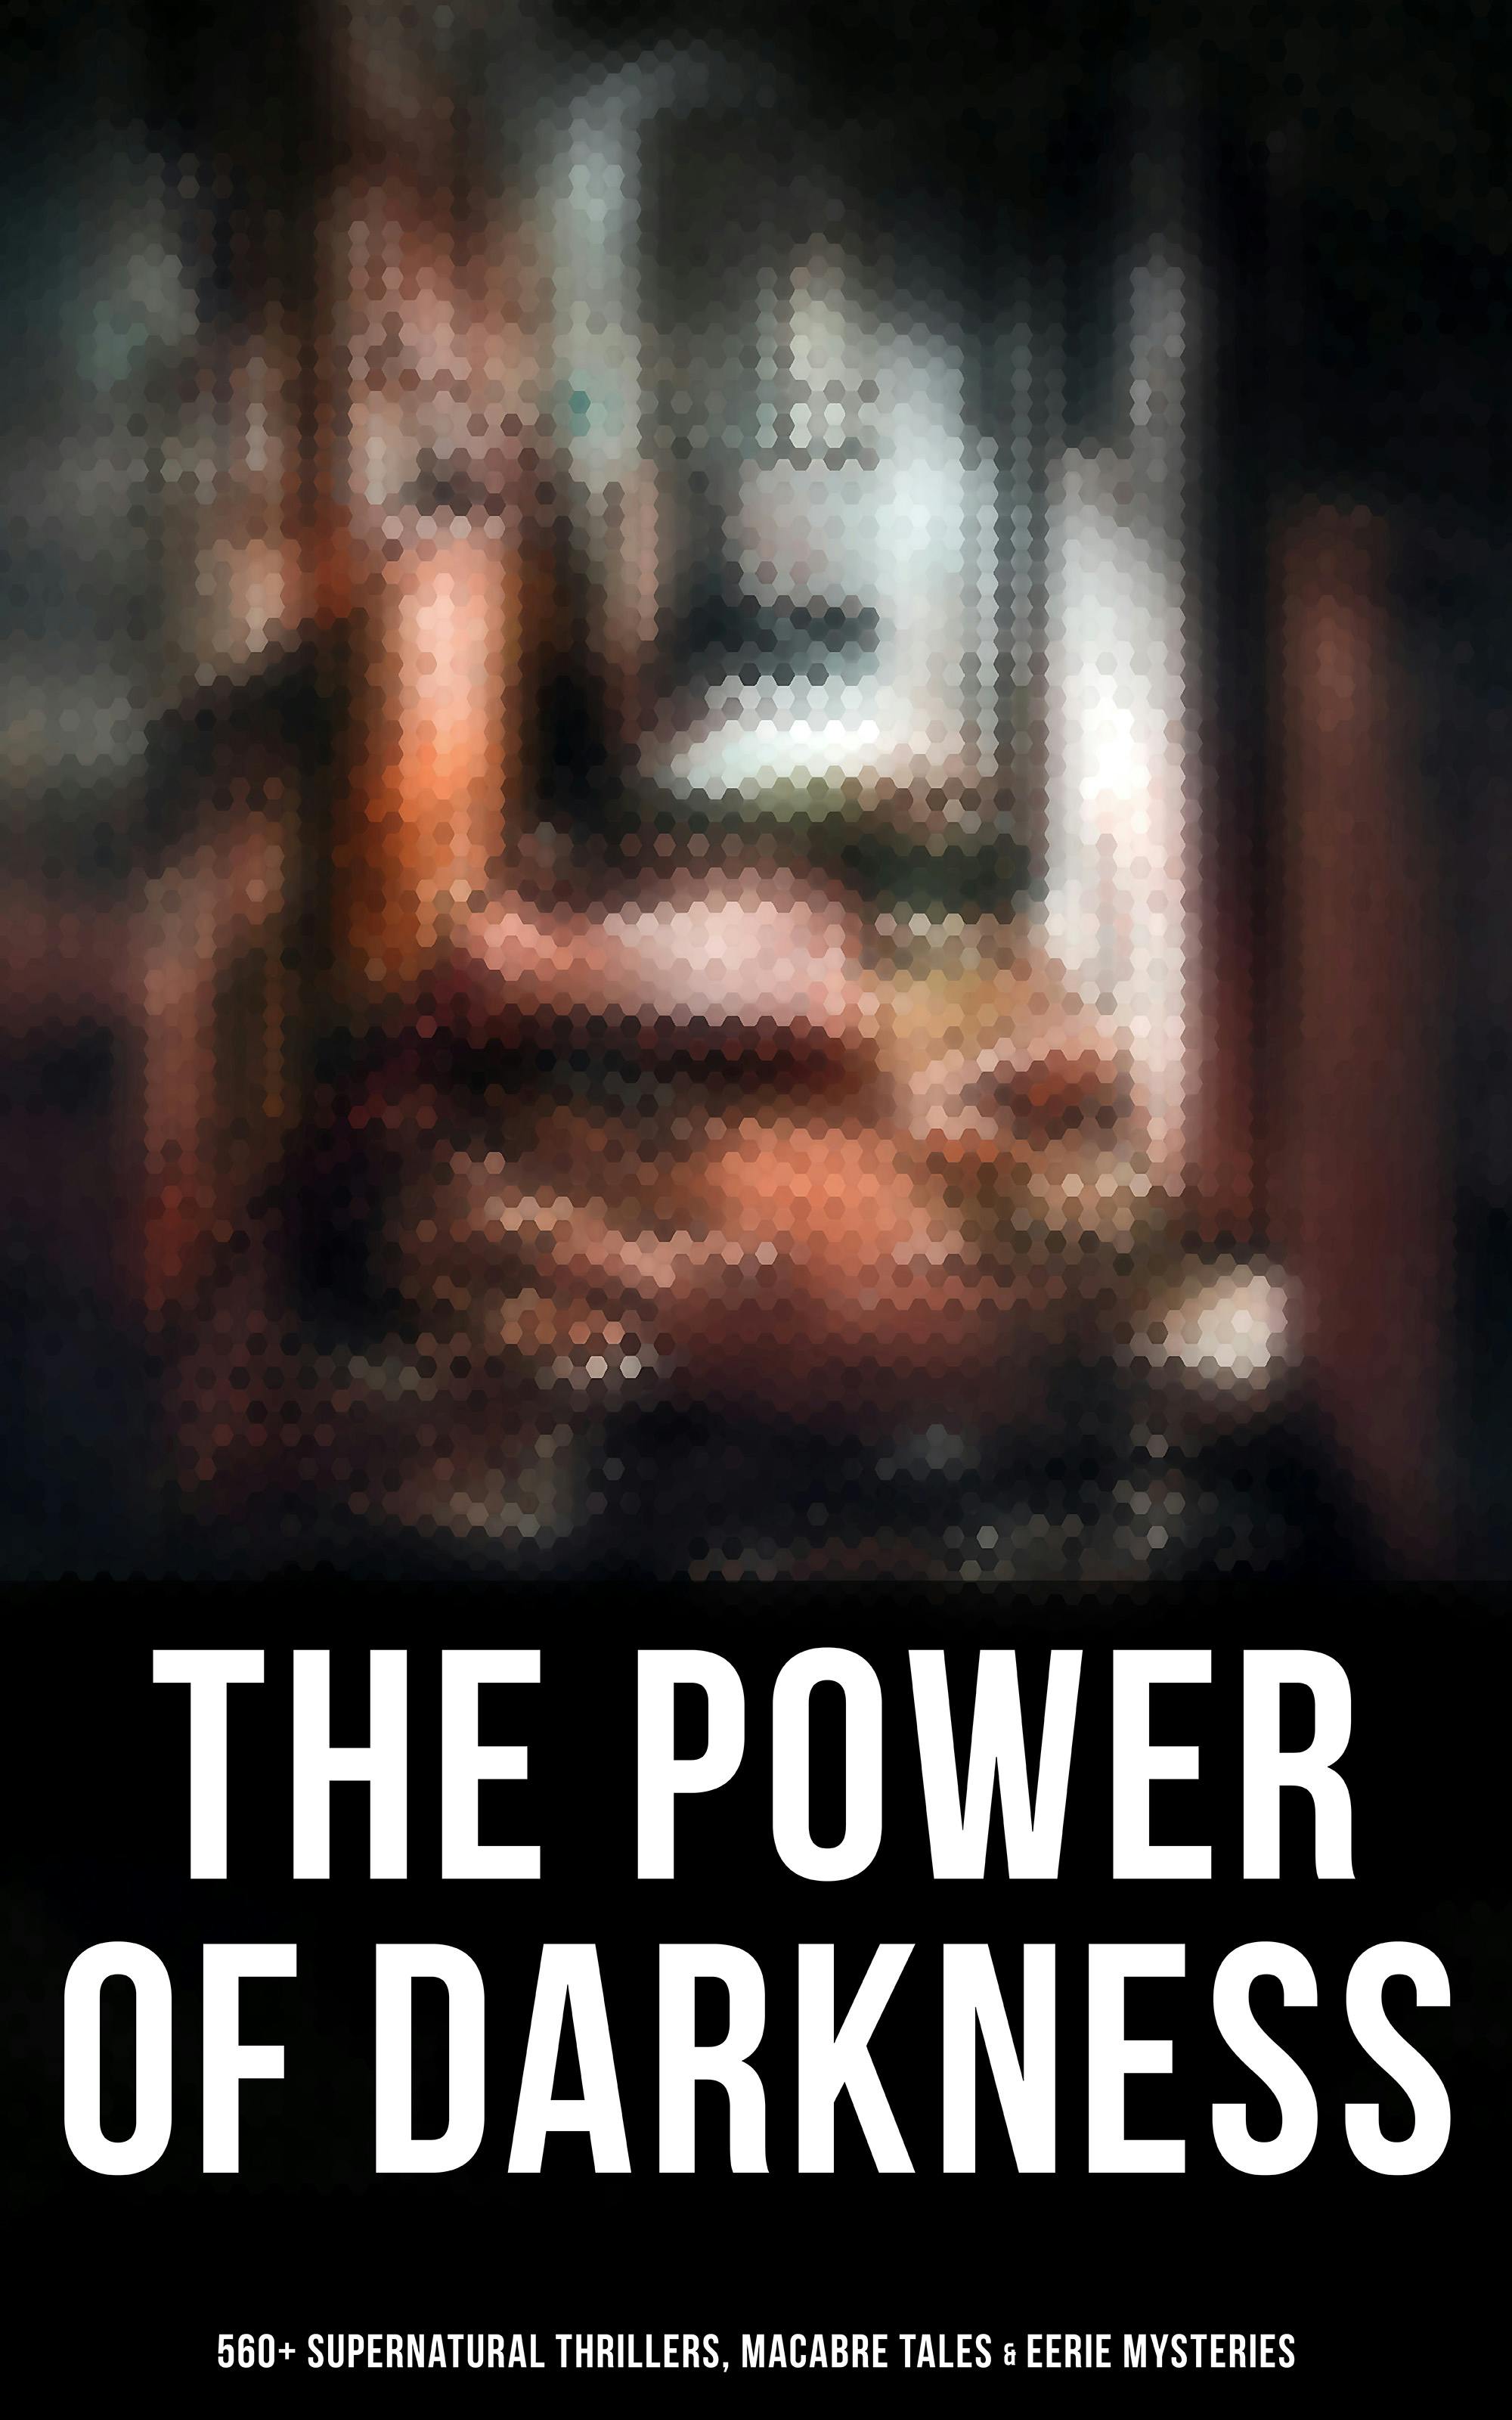 The Power of Darkness: 560+ Supernatural Thrillers, Macabre Tales & Eerie Mysteries: The Legend of Sleepy Hollow, Sweeney Todd, Frankenstein, Dracula, The Haunted House, Dead Souls… - undefined